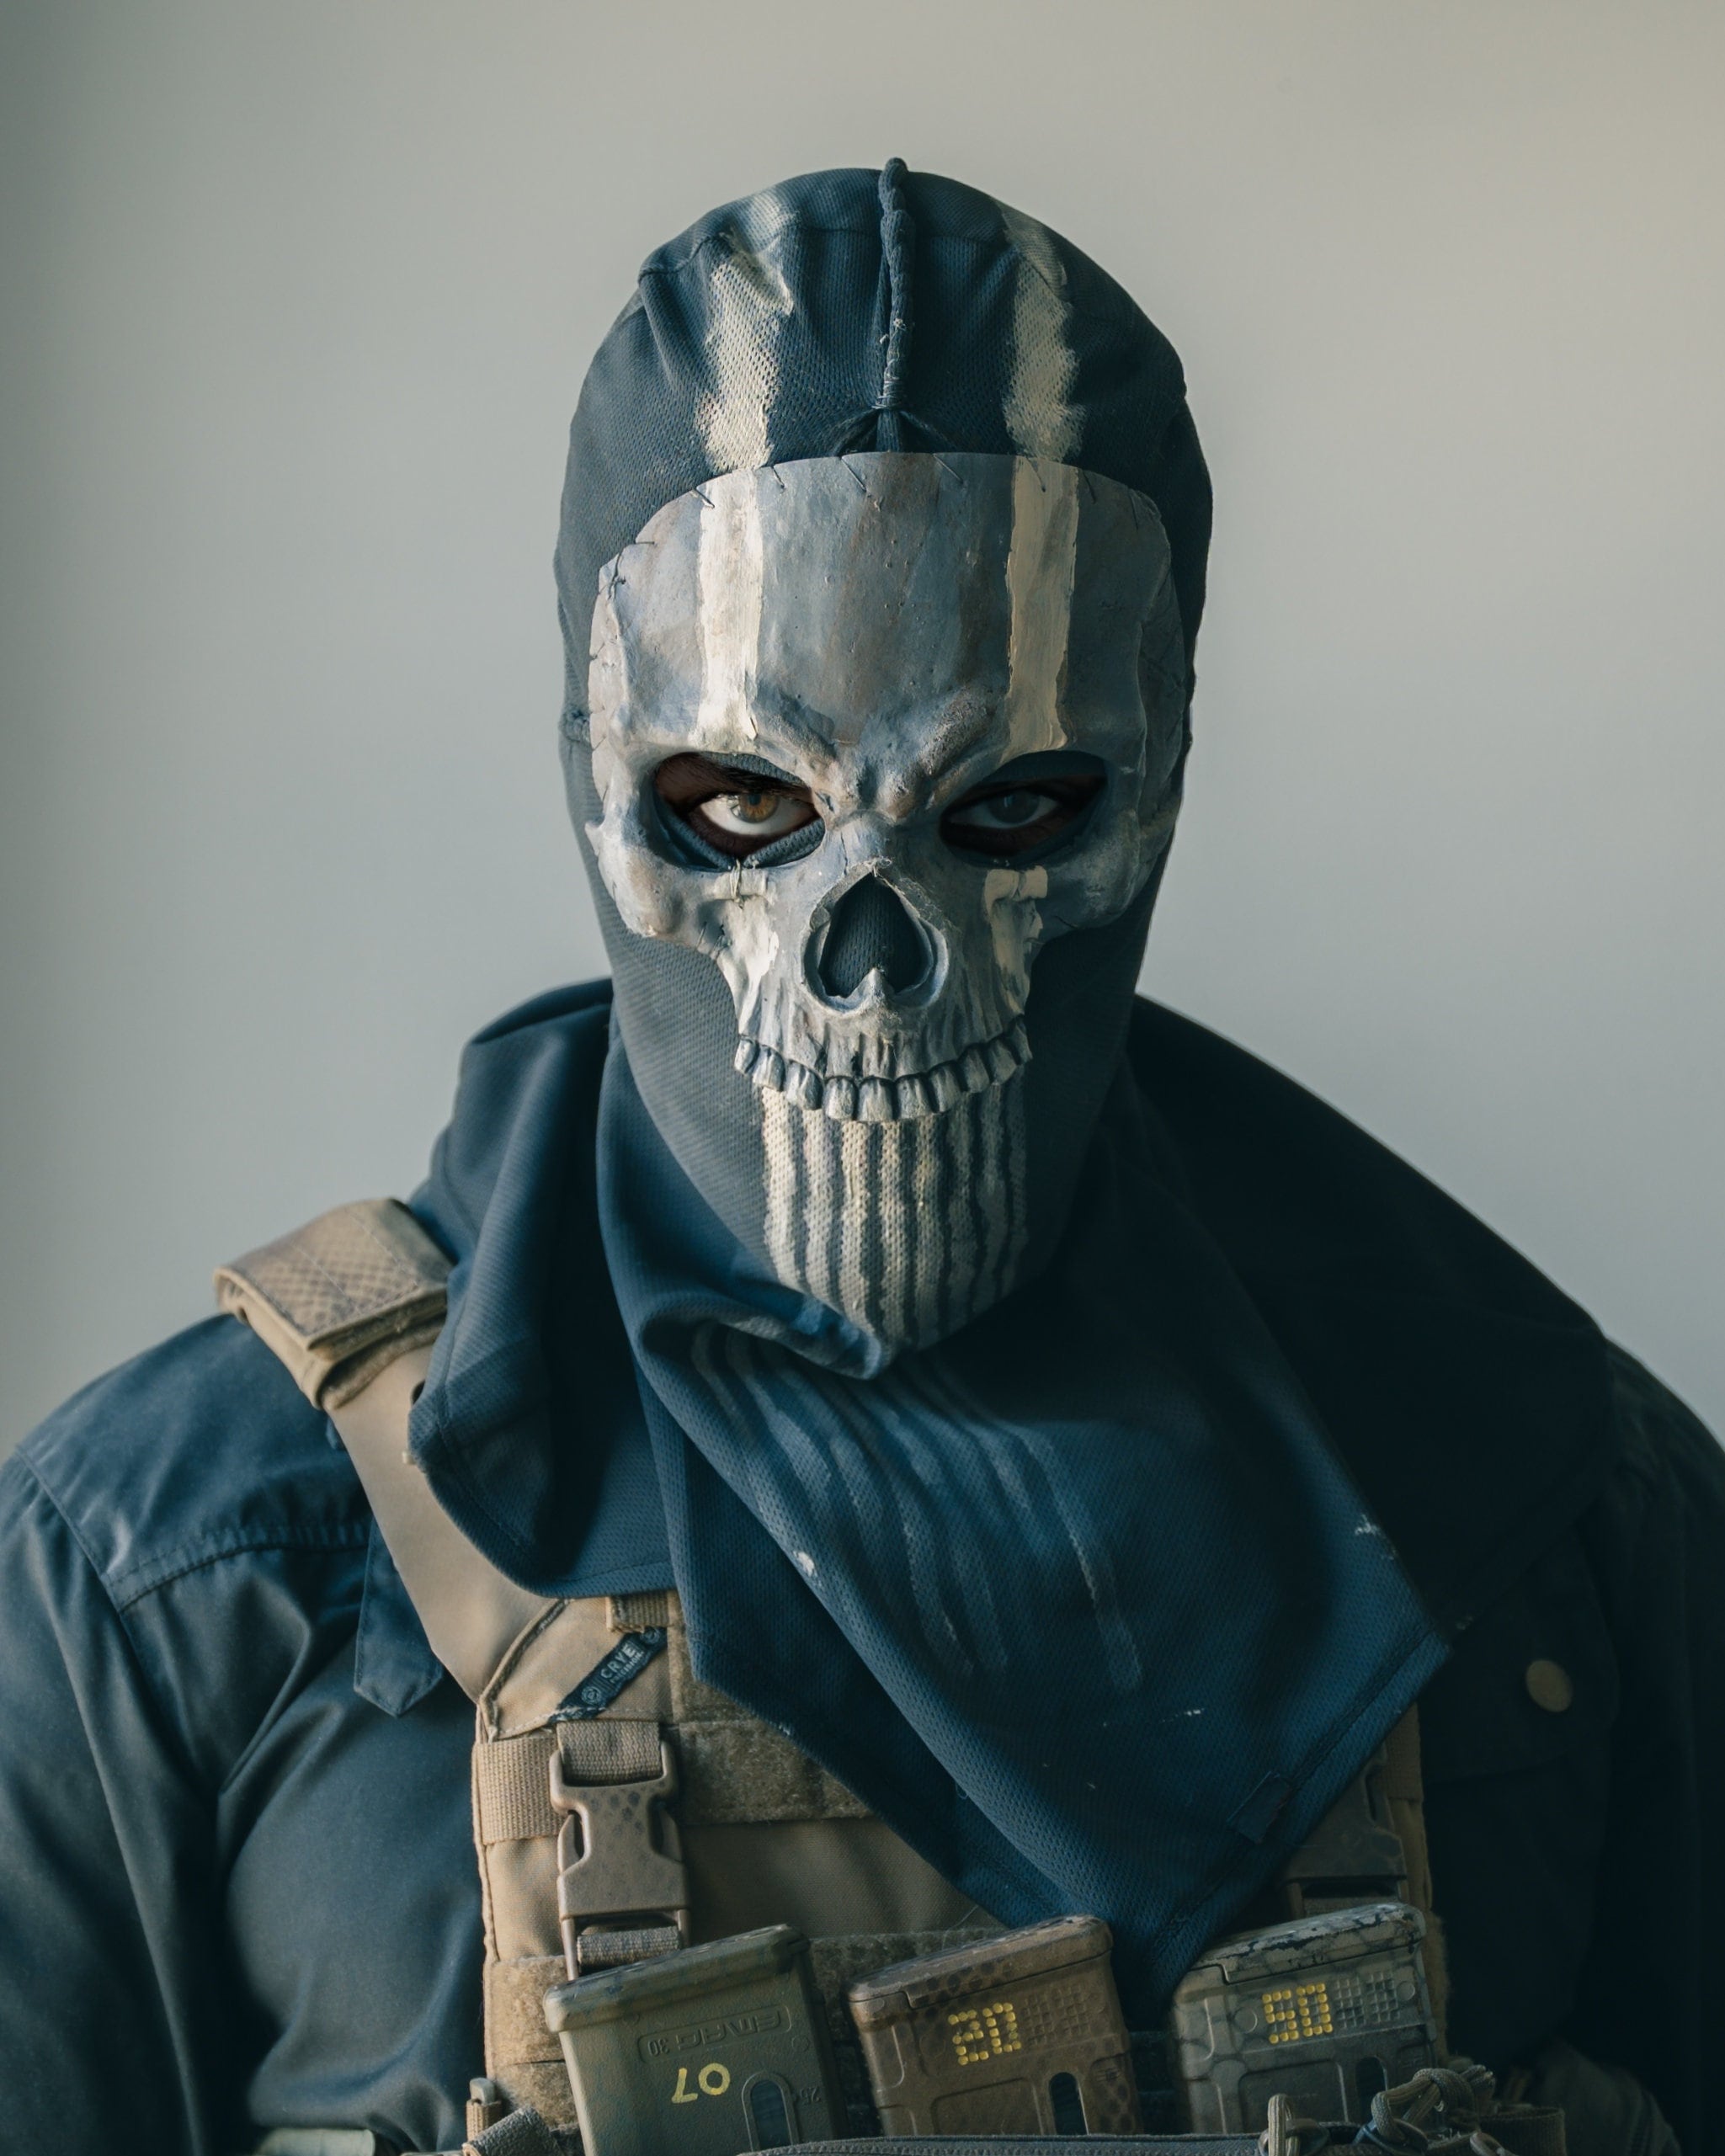 Ghost mw2 mask for cosplay